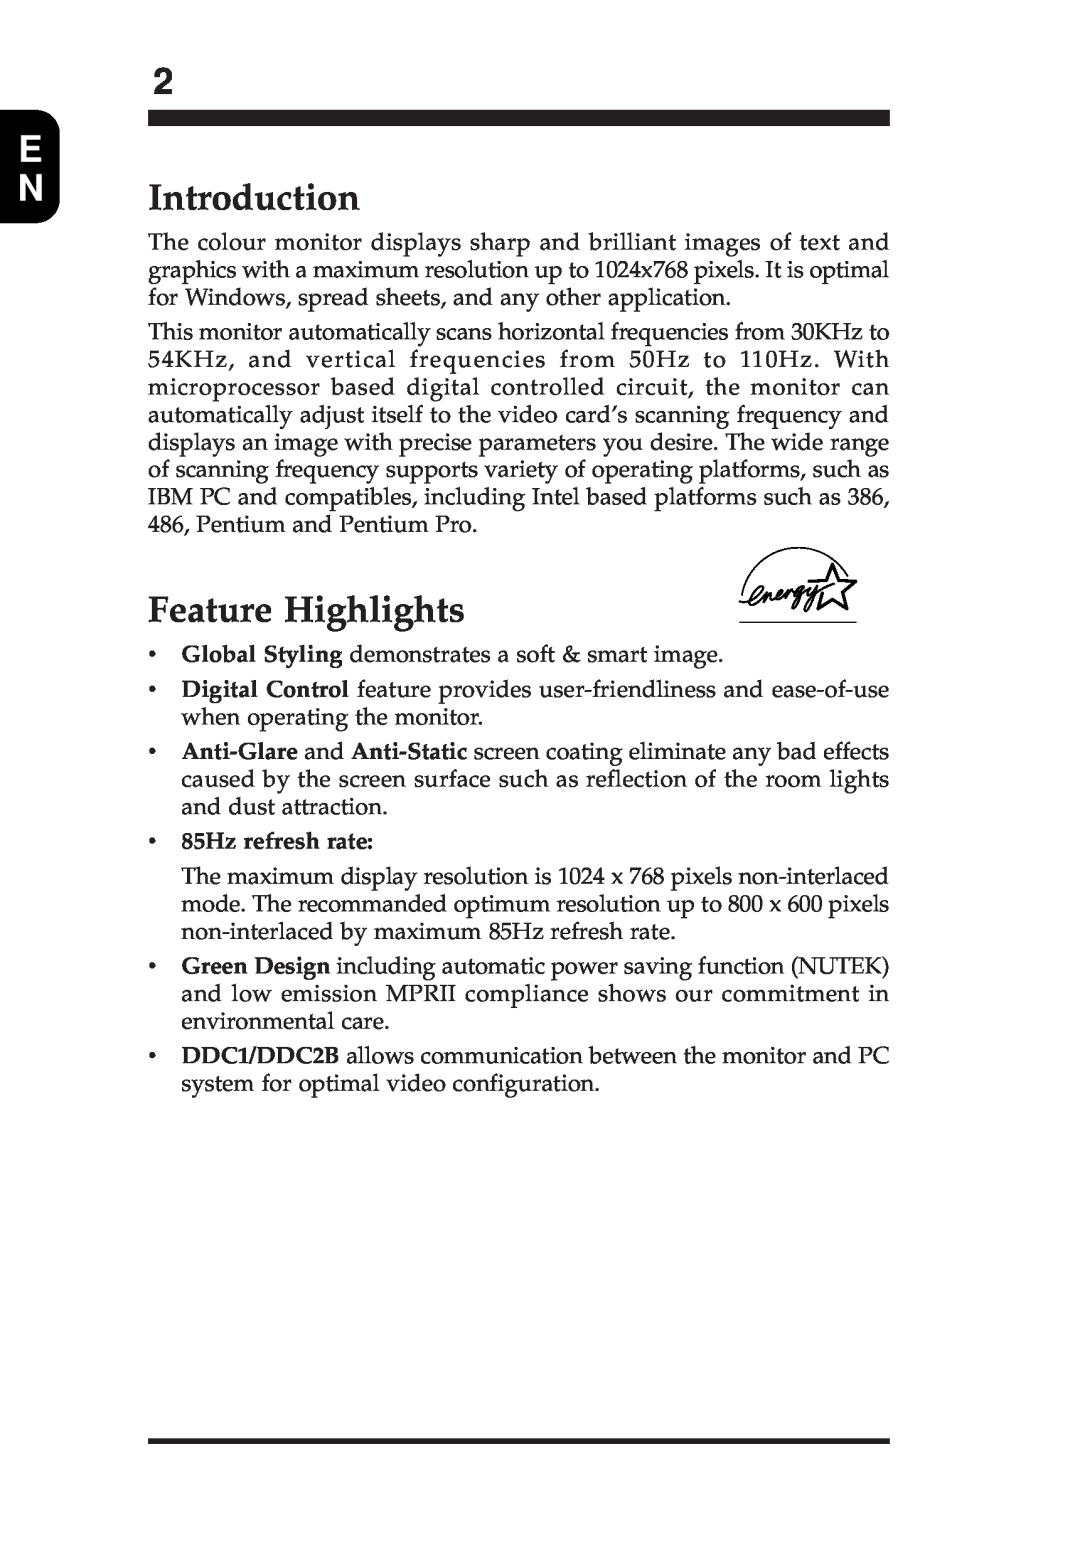 Philips MB4010T001 appendix NIntroduction, Feature Highlights 